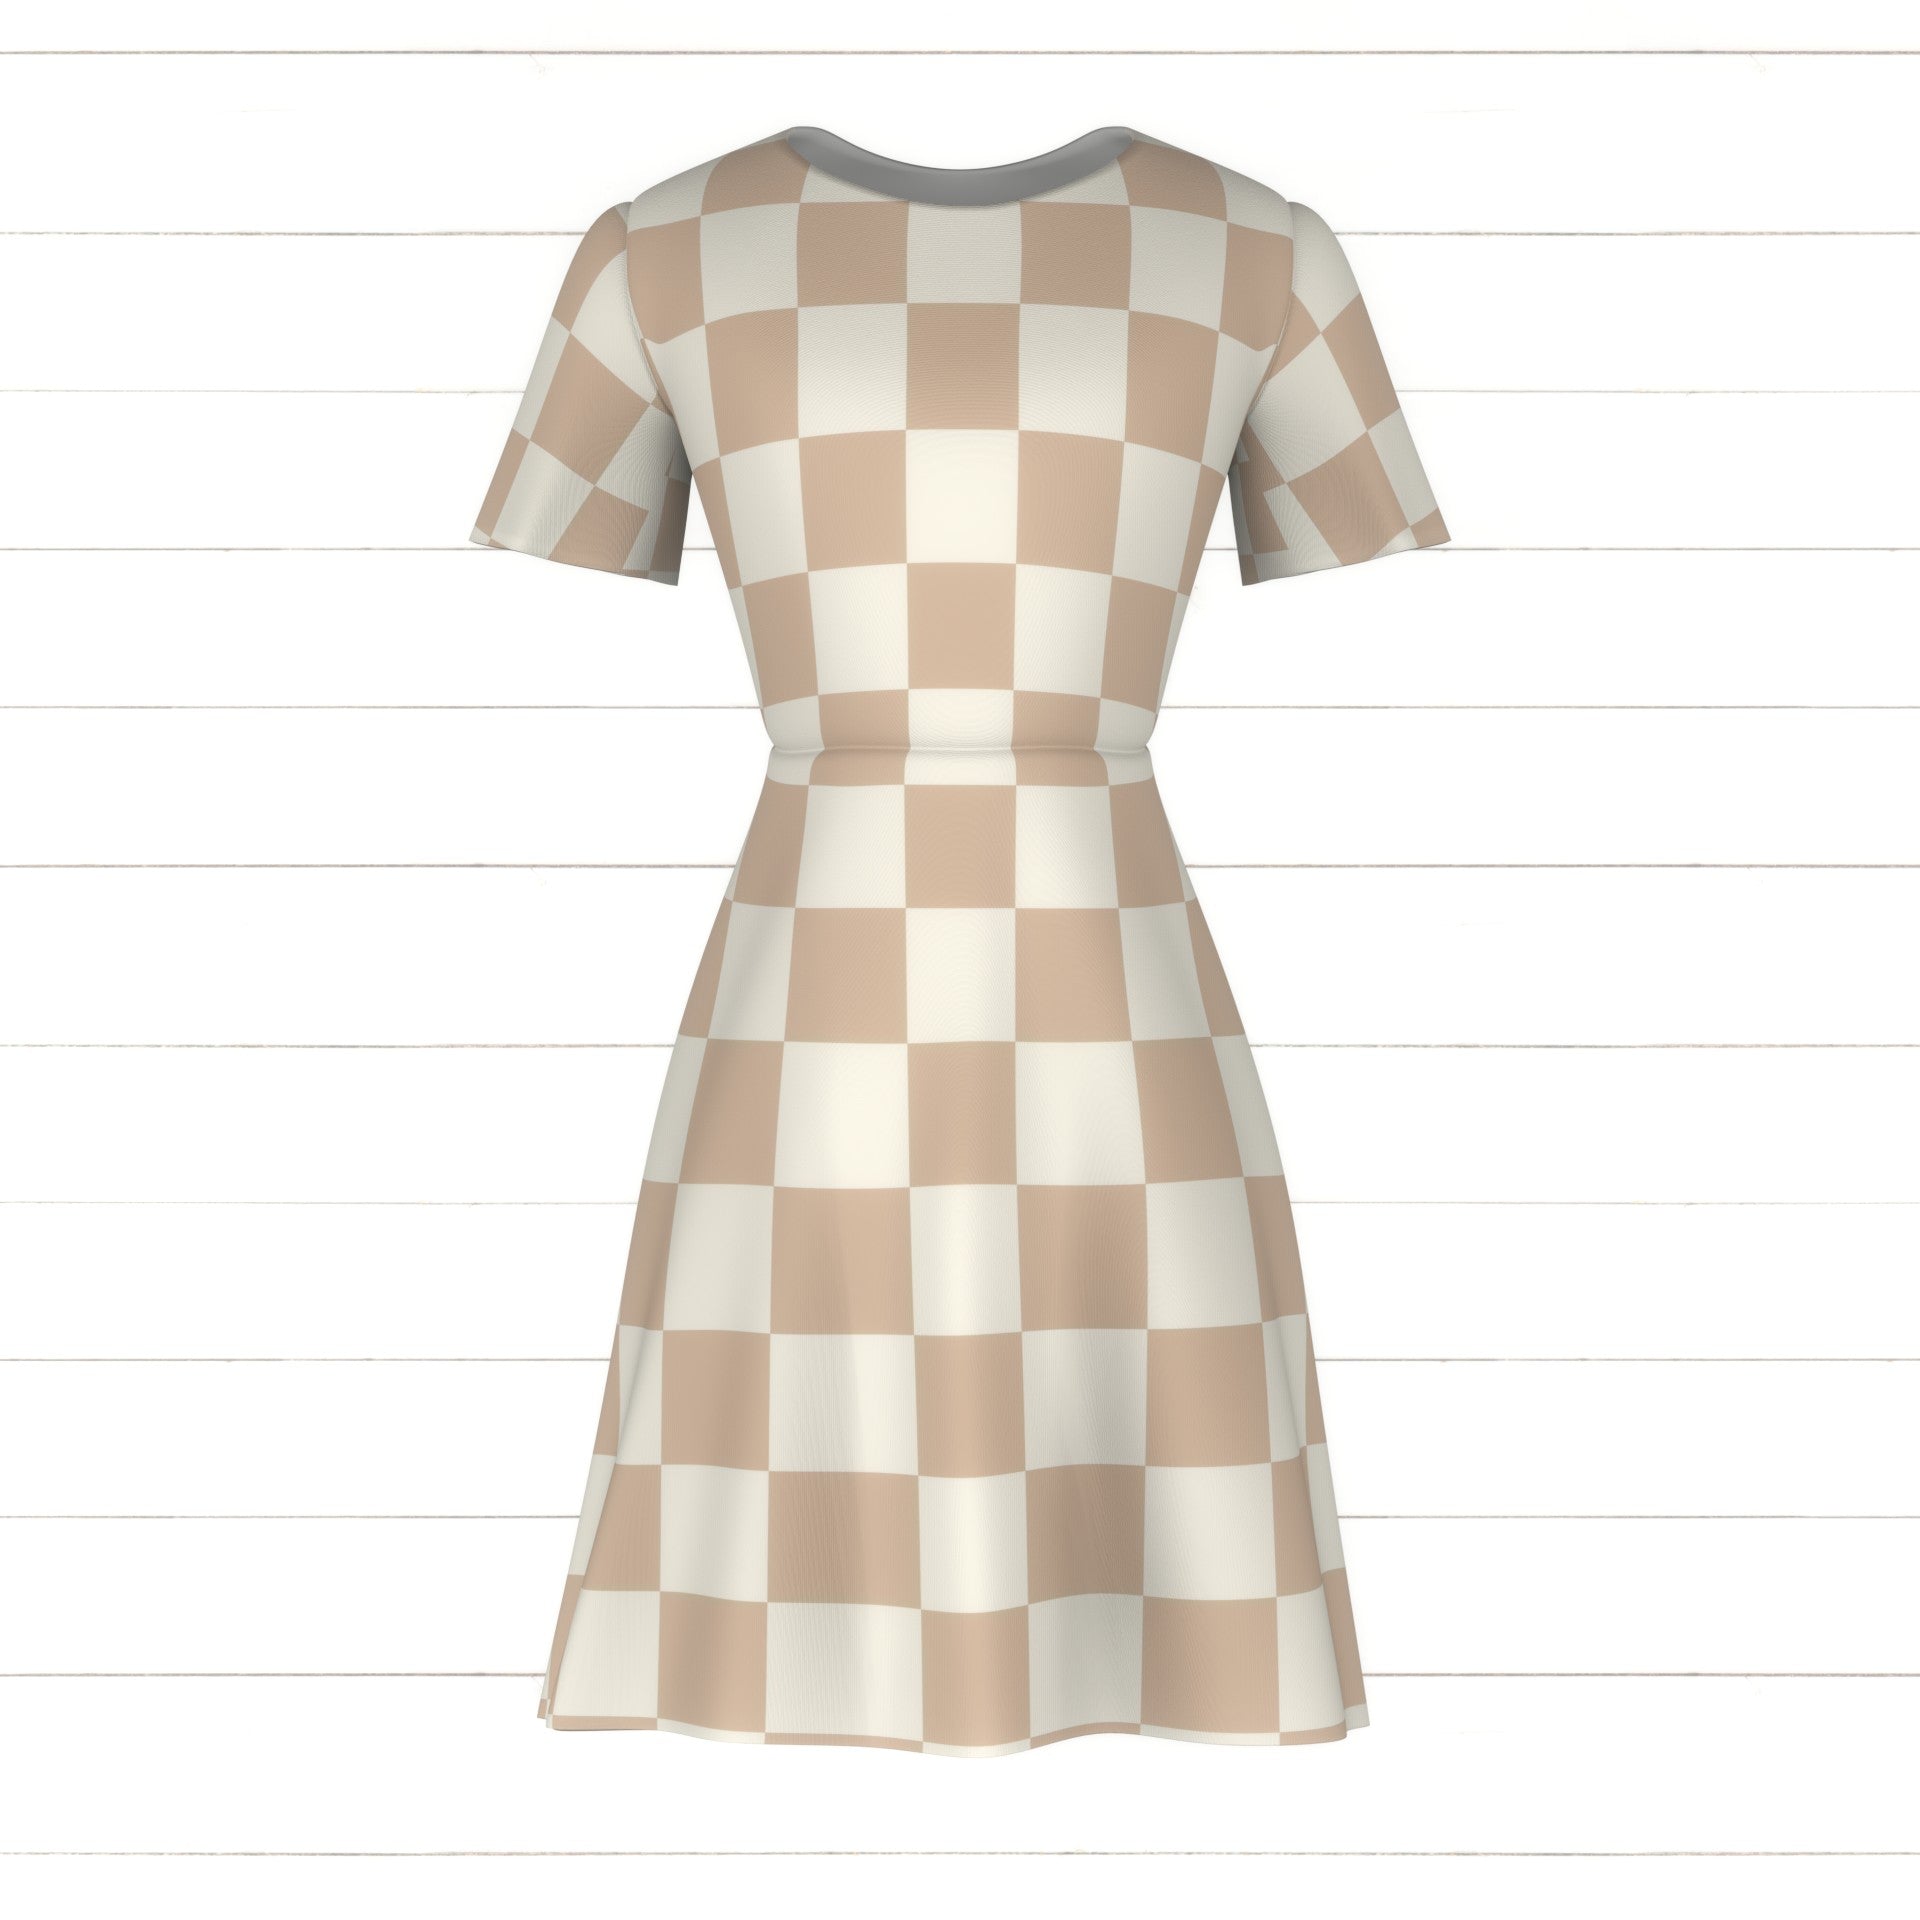 Checkerboard Check Checkered Pattern in Sage Green and Off White